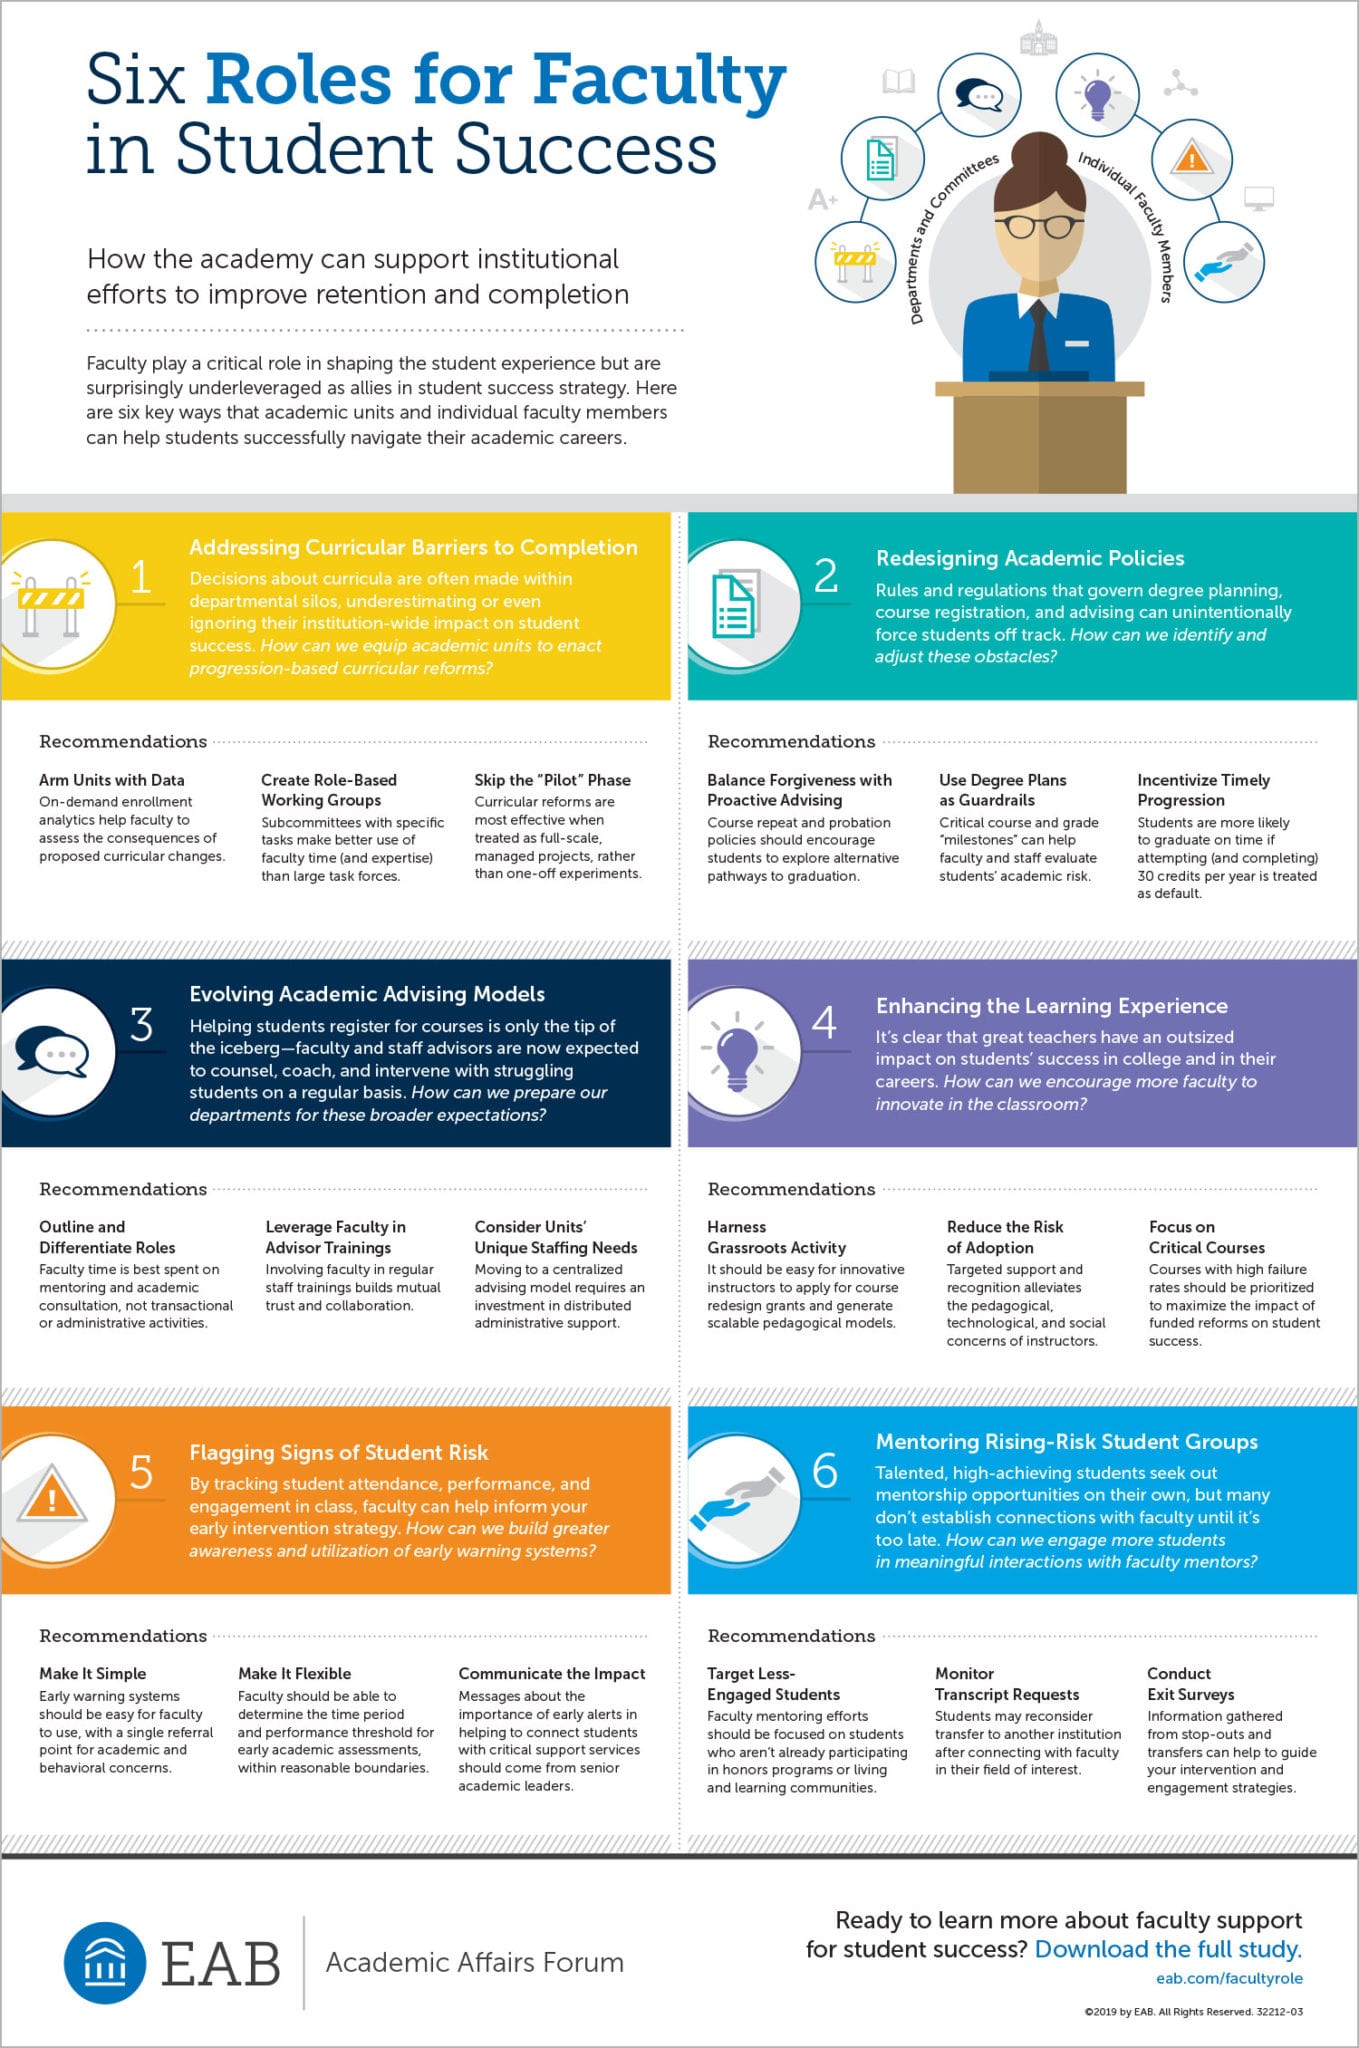 Six roles for faculty in student success infographic